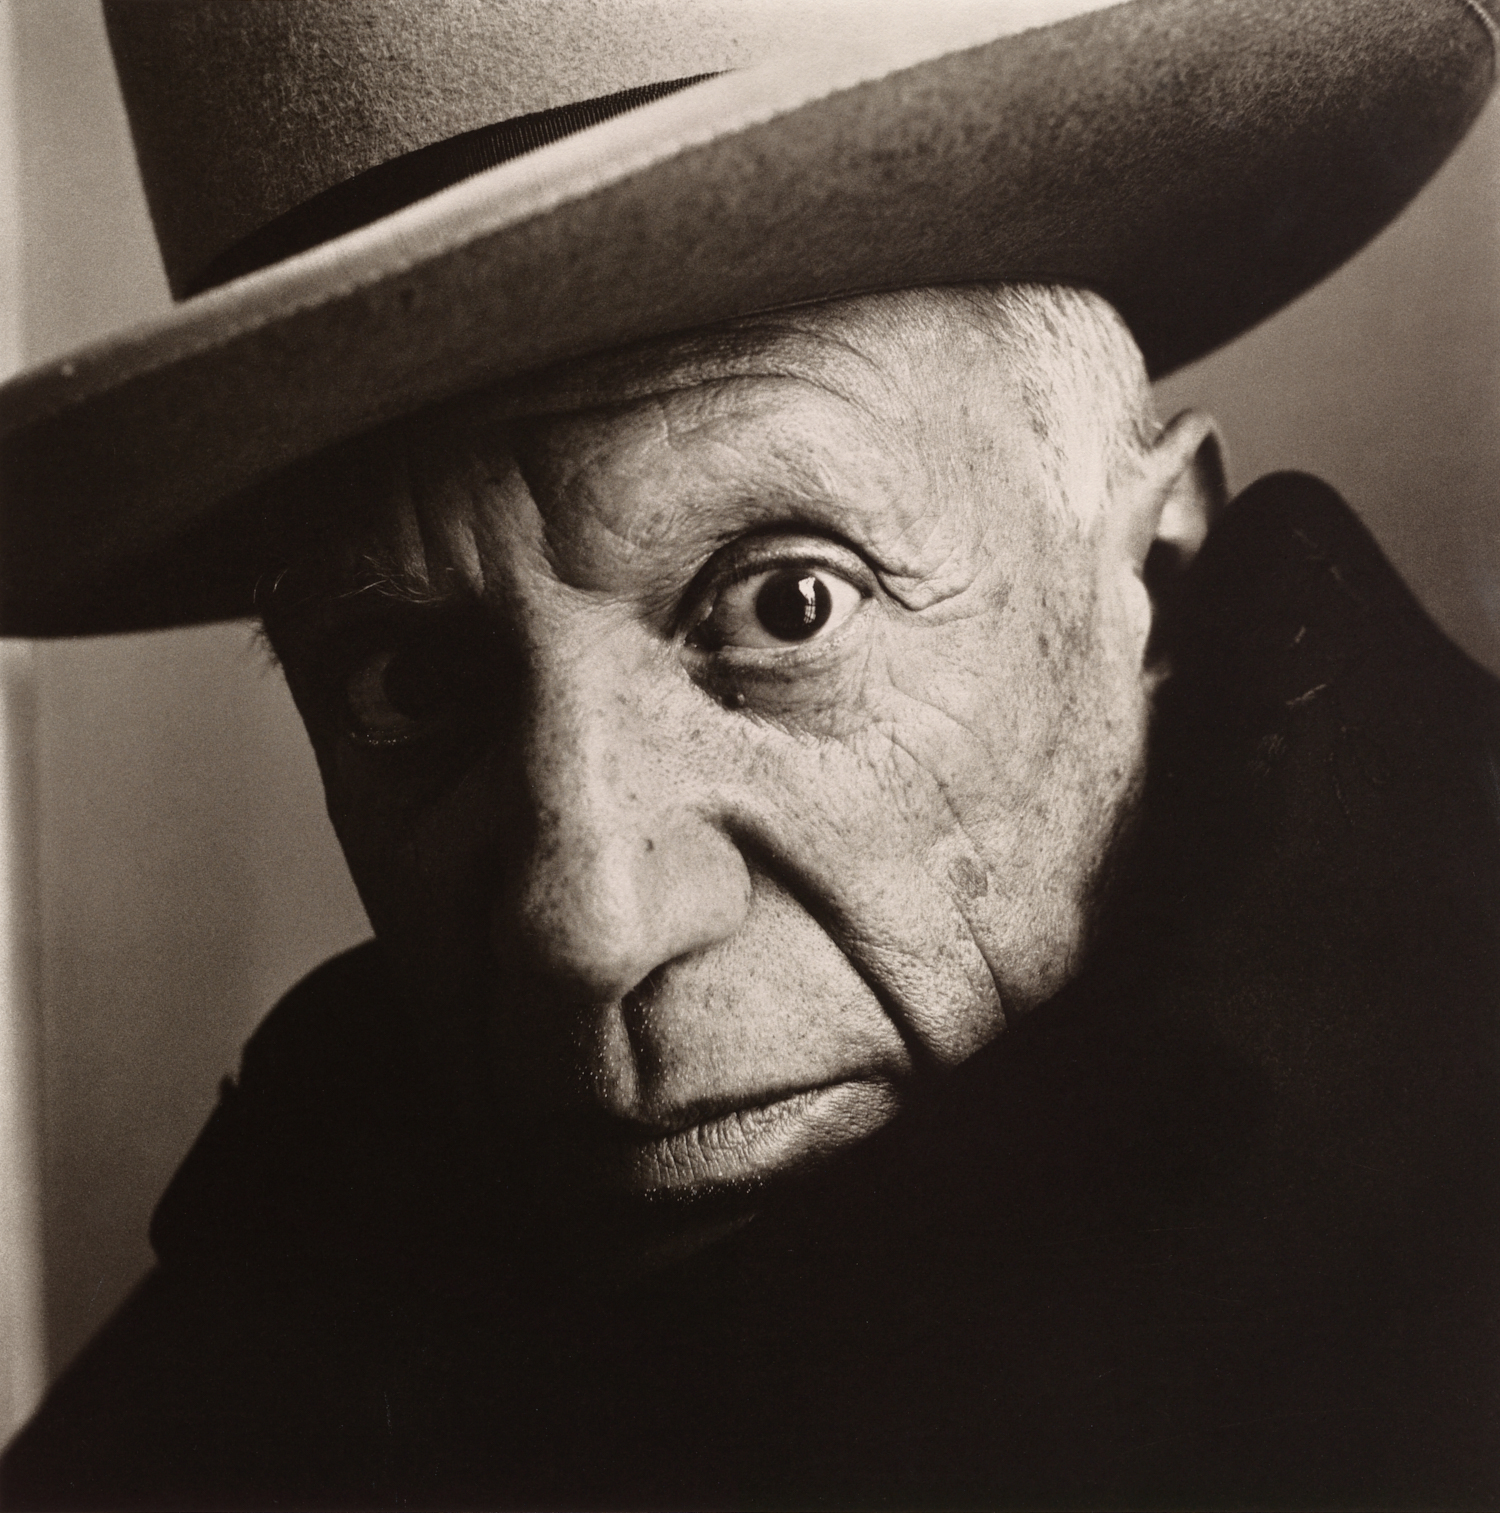 Pablo Picasso at La Californie, Cannes, 1957. (Nguồn: The Irving Penn Foundation)